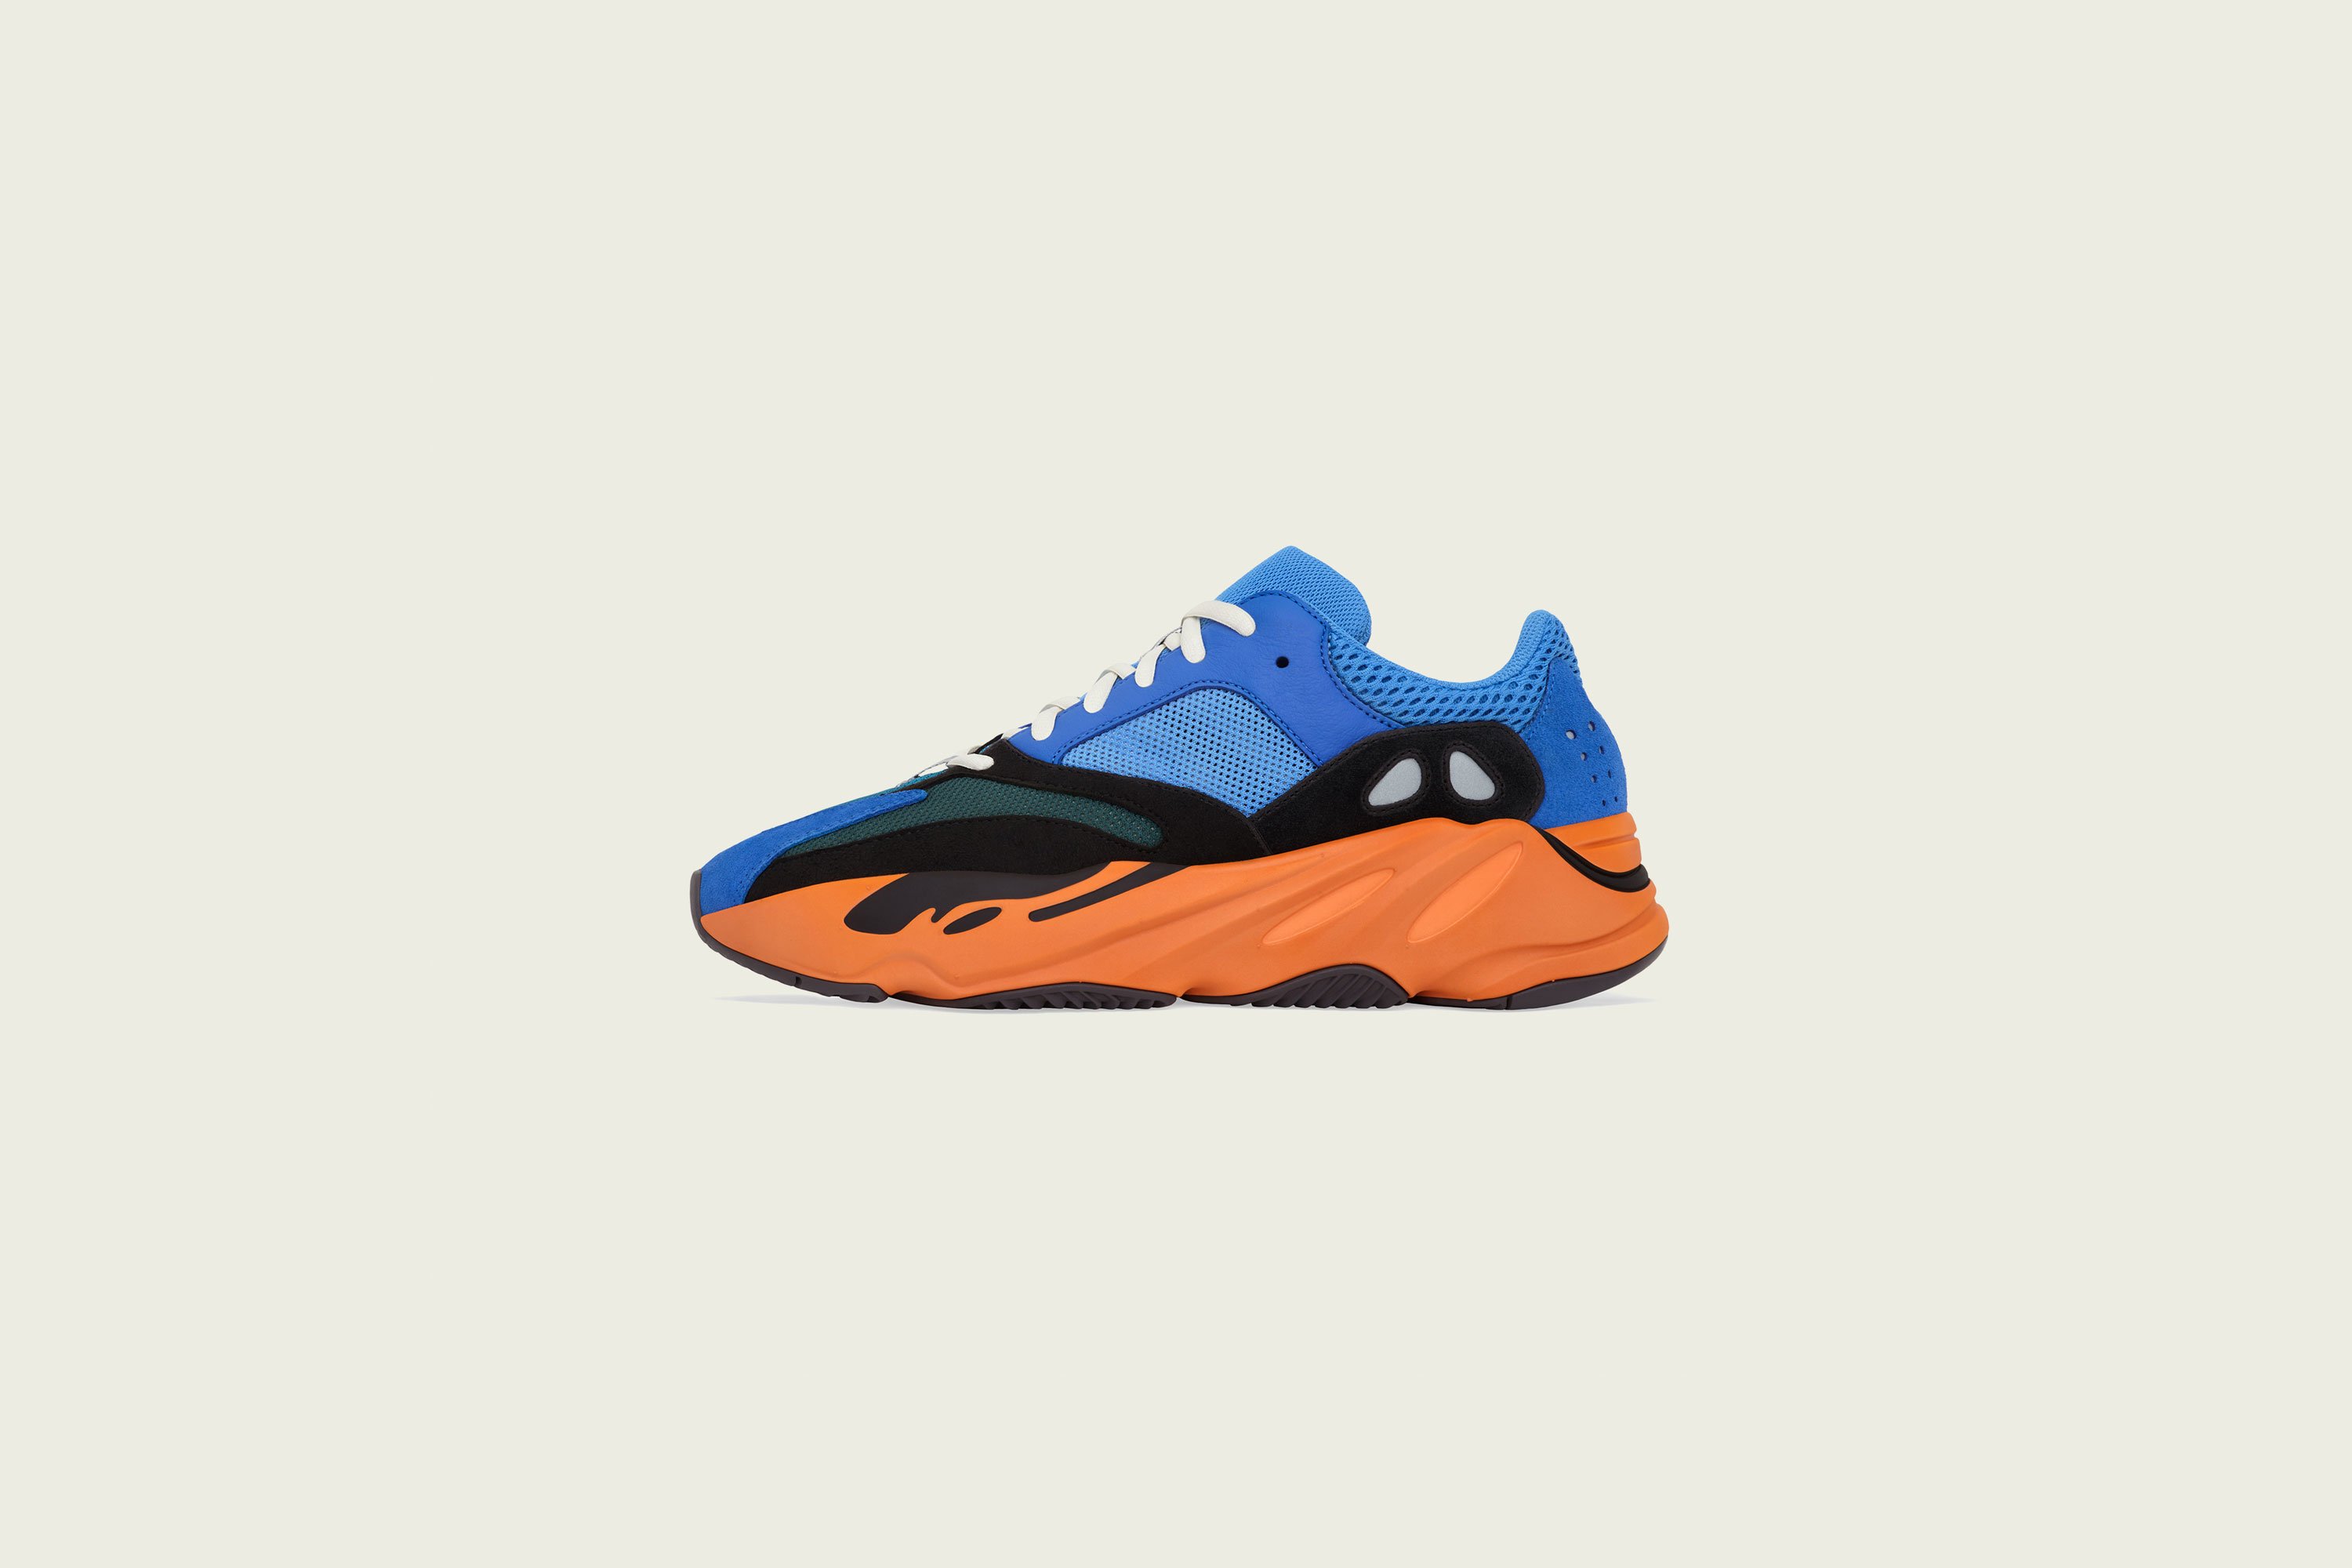 Up There Launches - adidas Originals Kanye West Yeezy Boost 700V1 Bright Blue